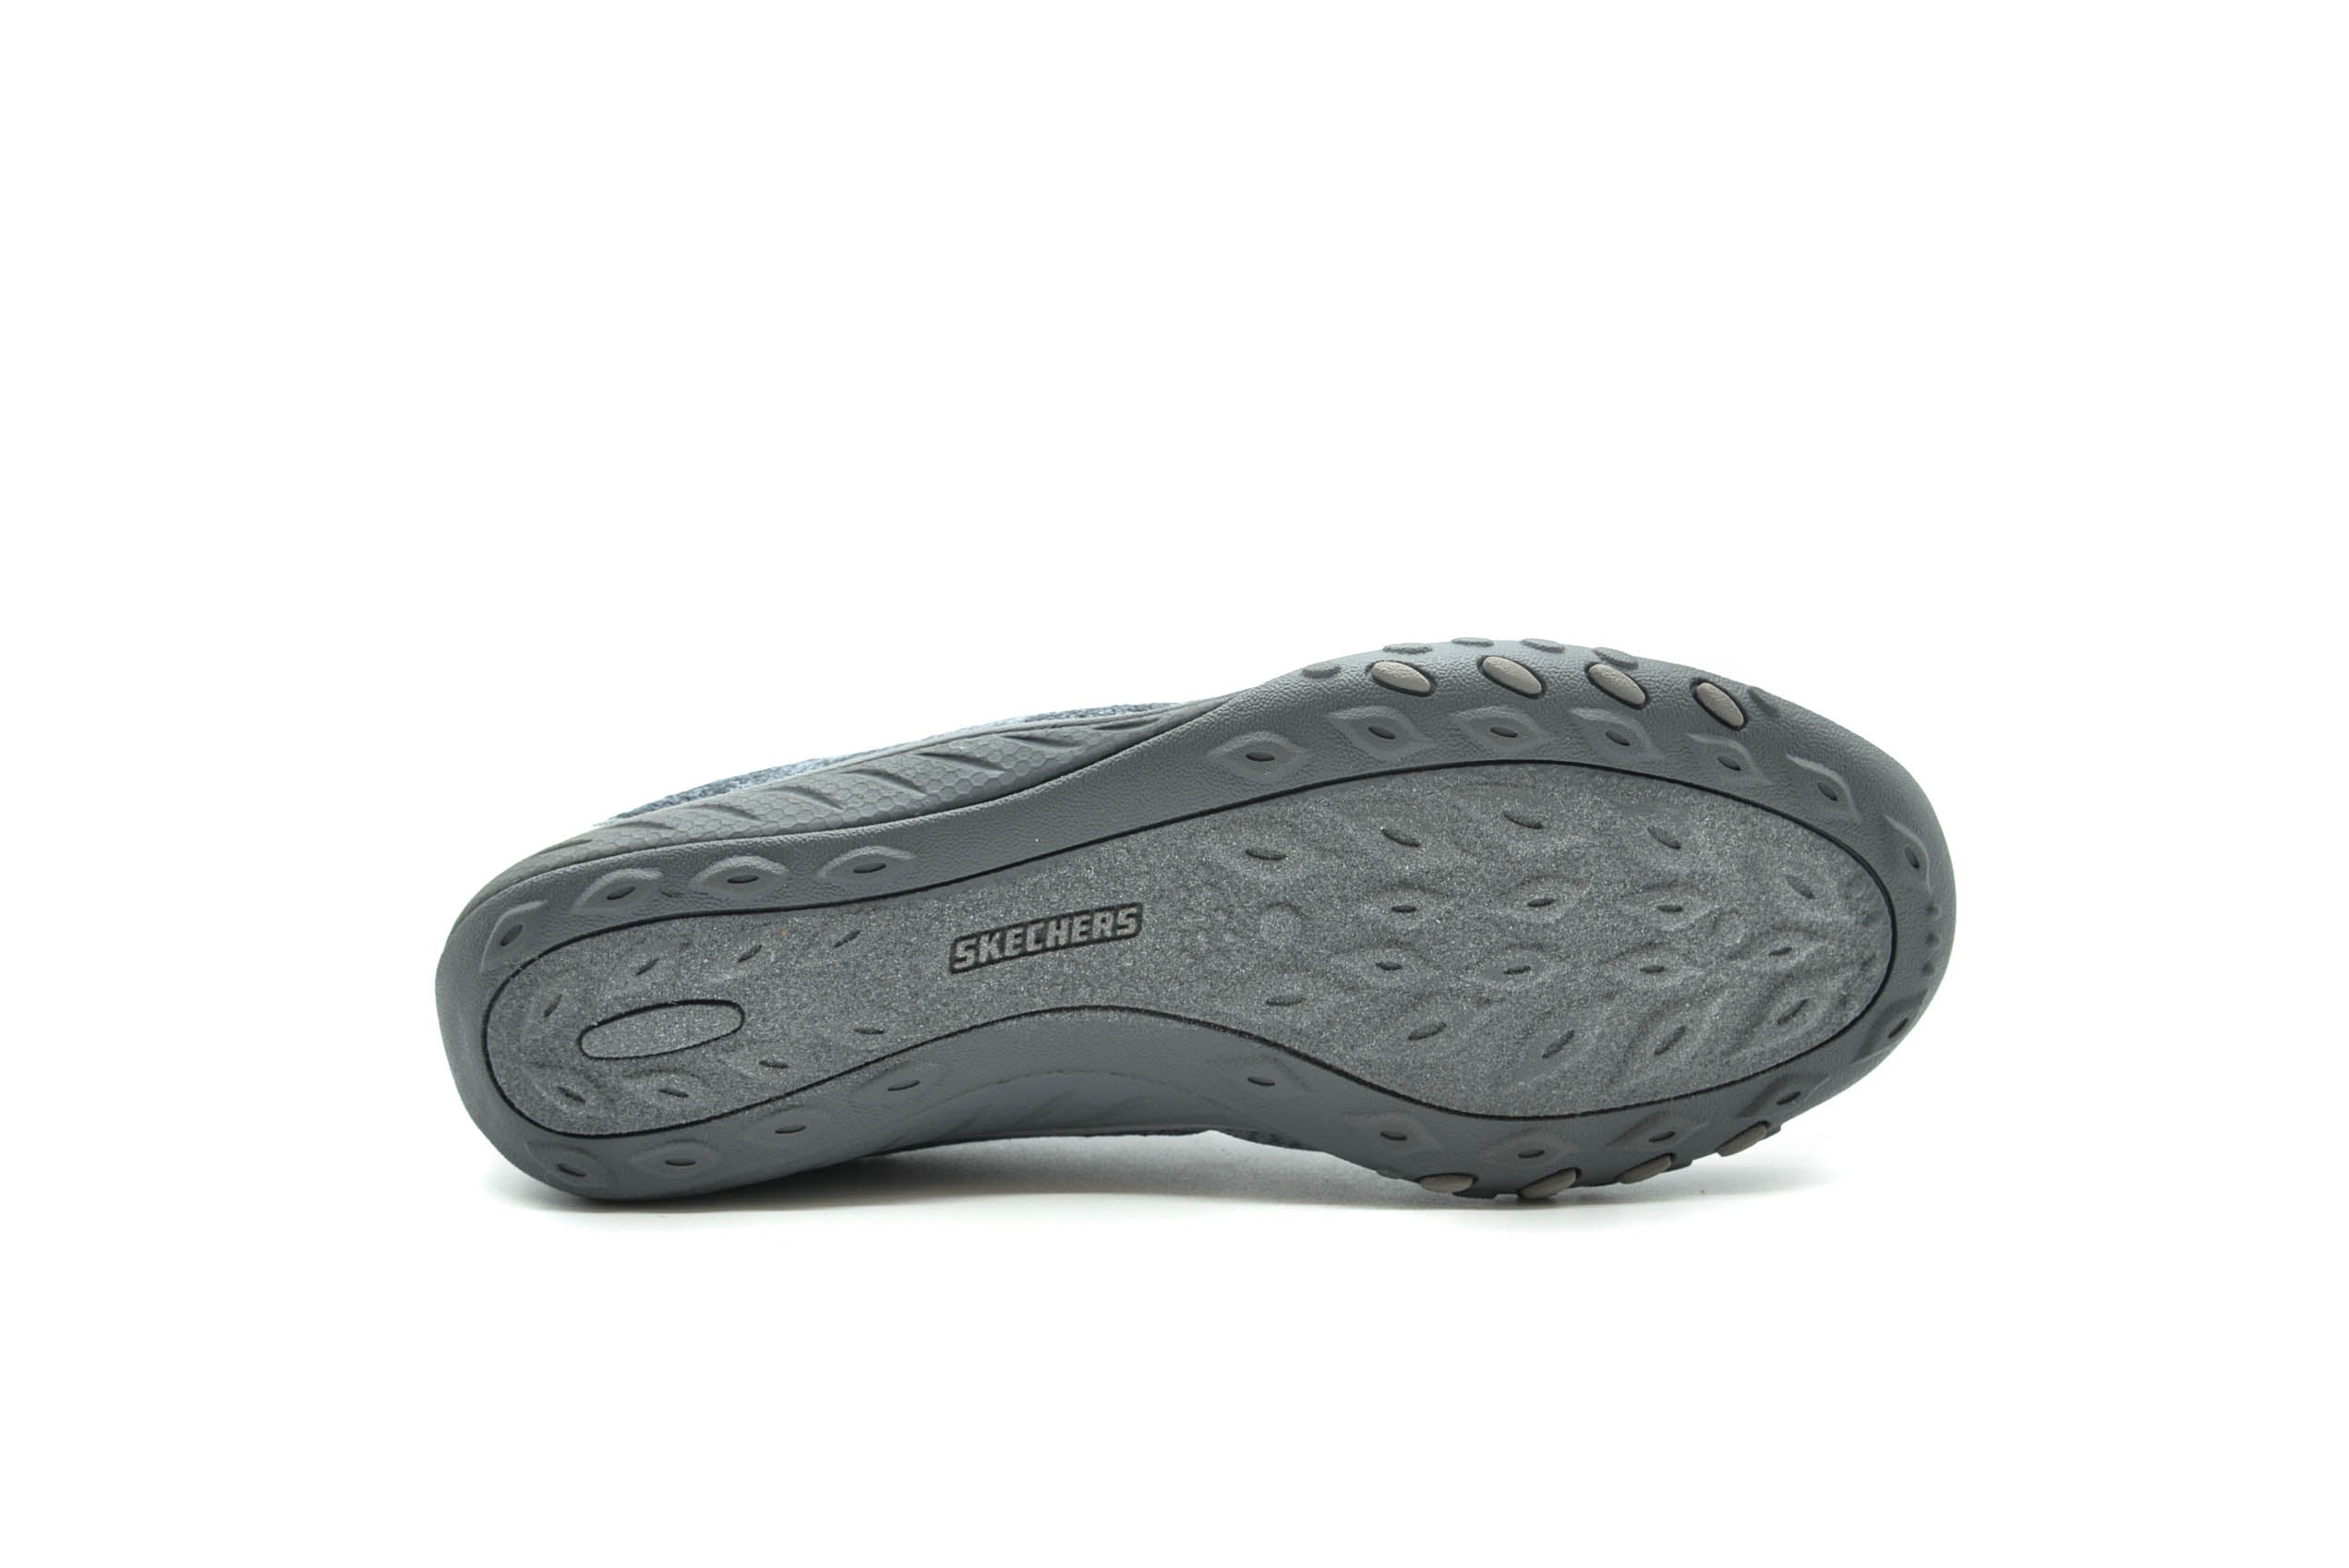 SKECHERS Relaxed Fit: Breathe – shoeper.com